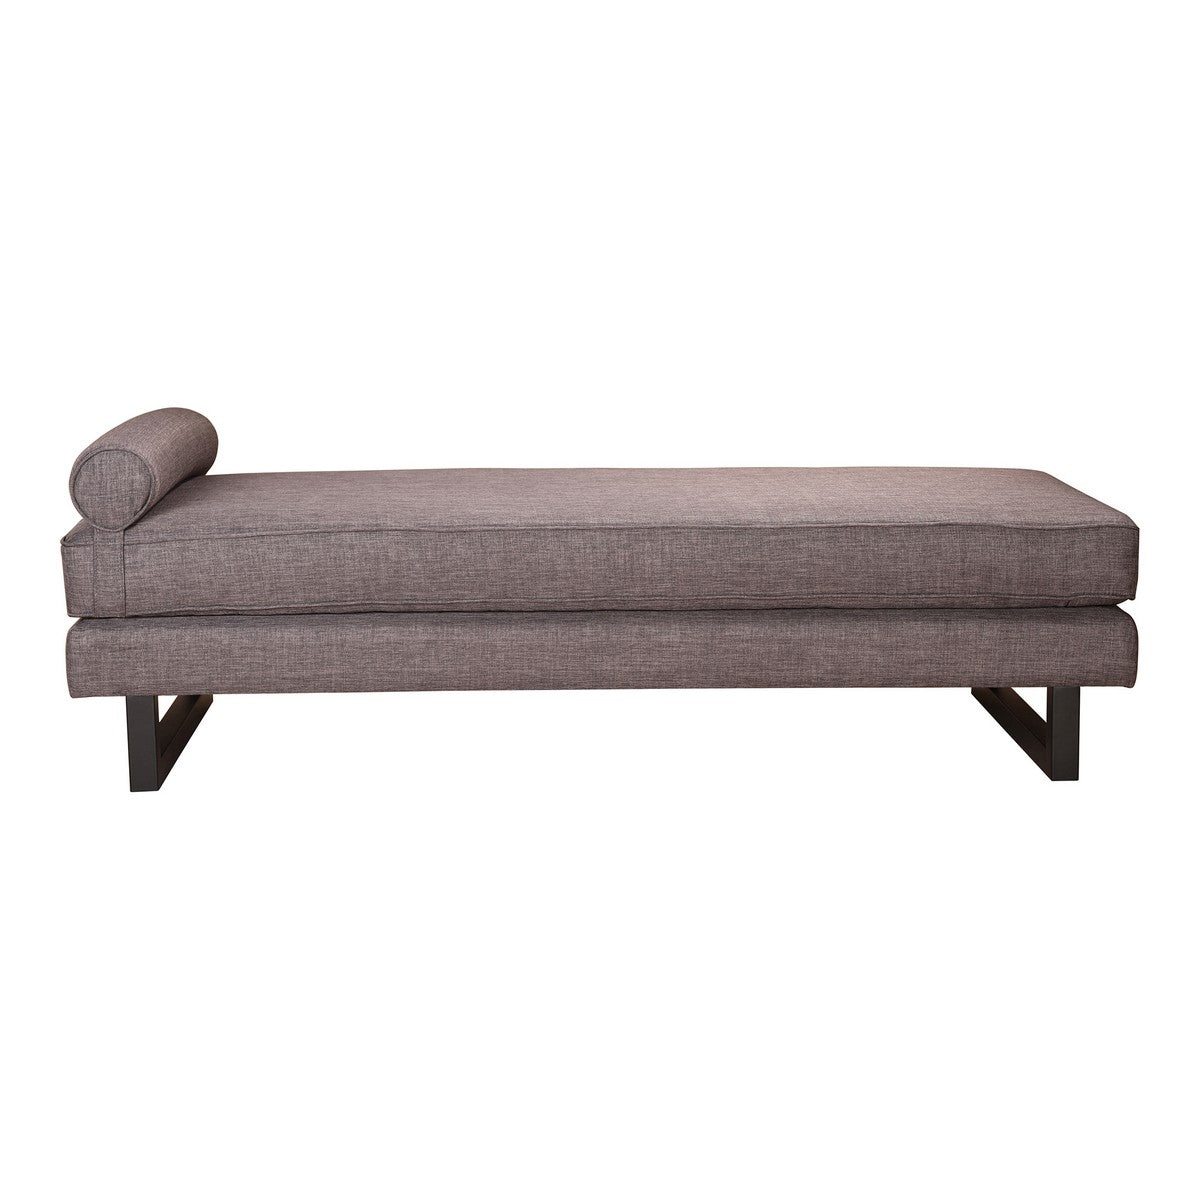 Moe's Home Collection Amadeo Daybed Grey - RN-1037-35 - Moe's Home Collection - Daybeds - Minimal And Modern - 1